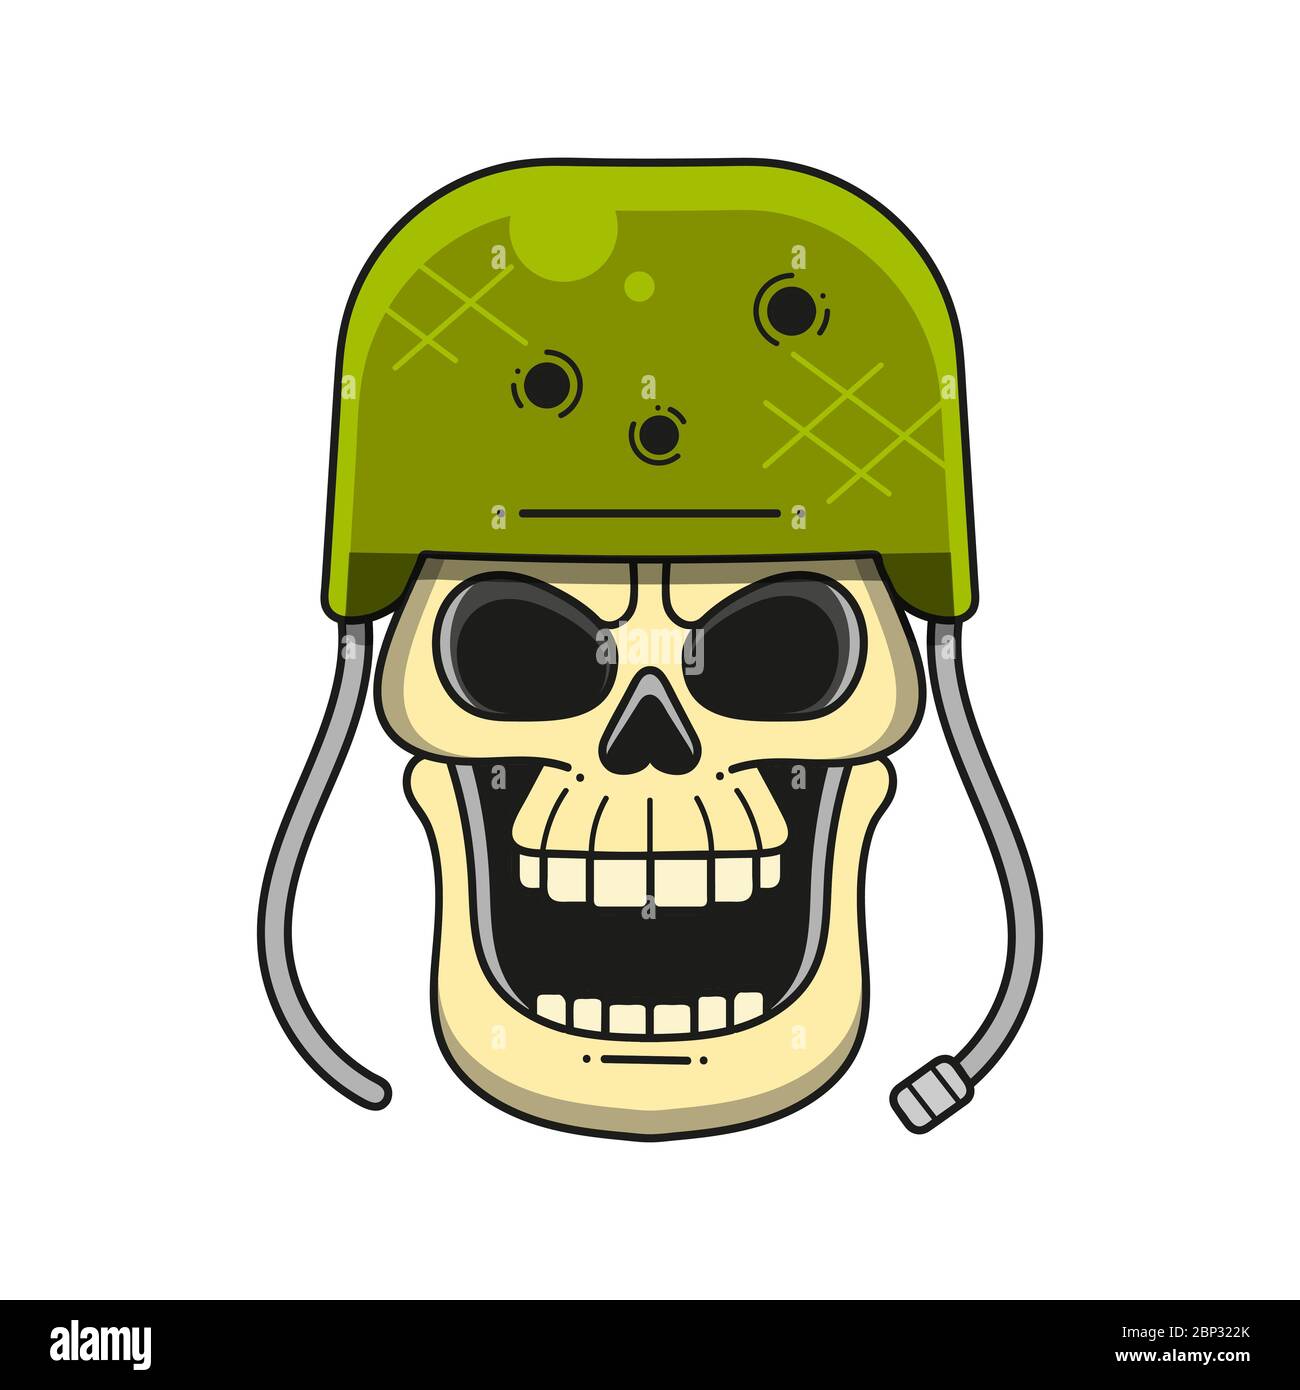 Military Skull In A Hard Hat With Machine Guns On A White Background Typography Illustration, Can Be Used As A Print For T'shirts, Bags, Cards And Pos Stock Vector